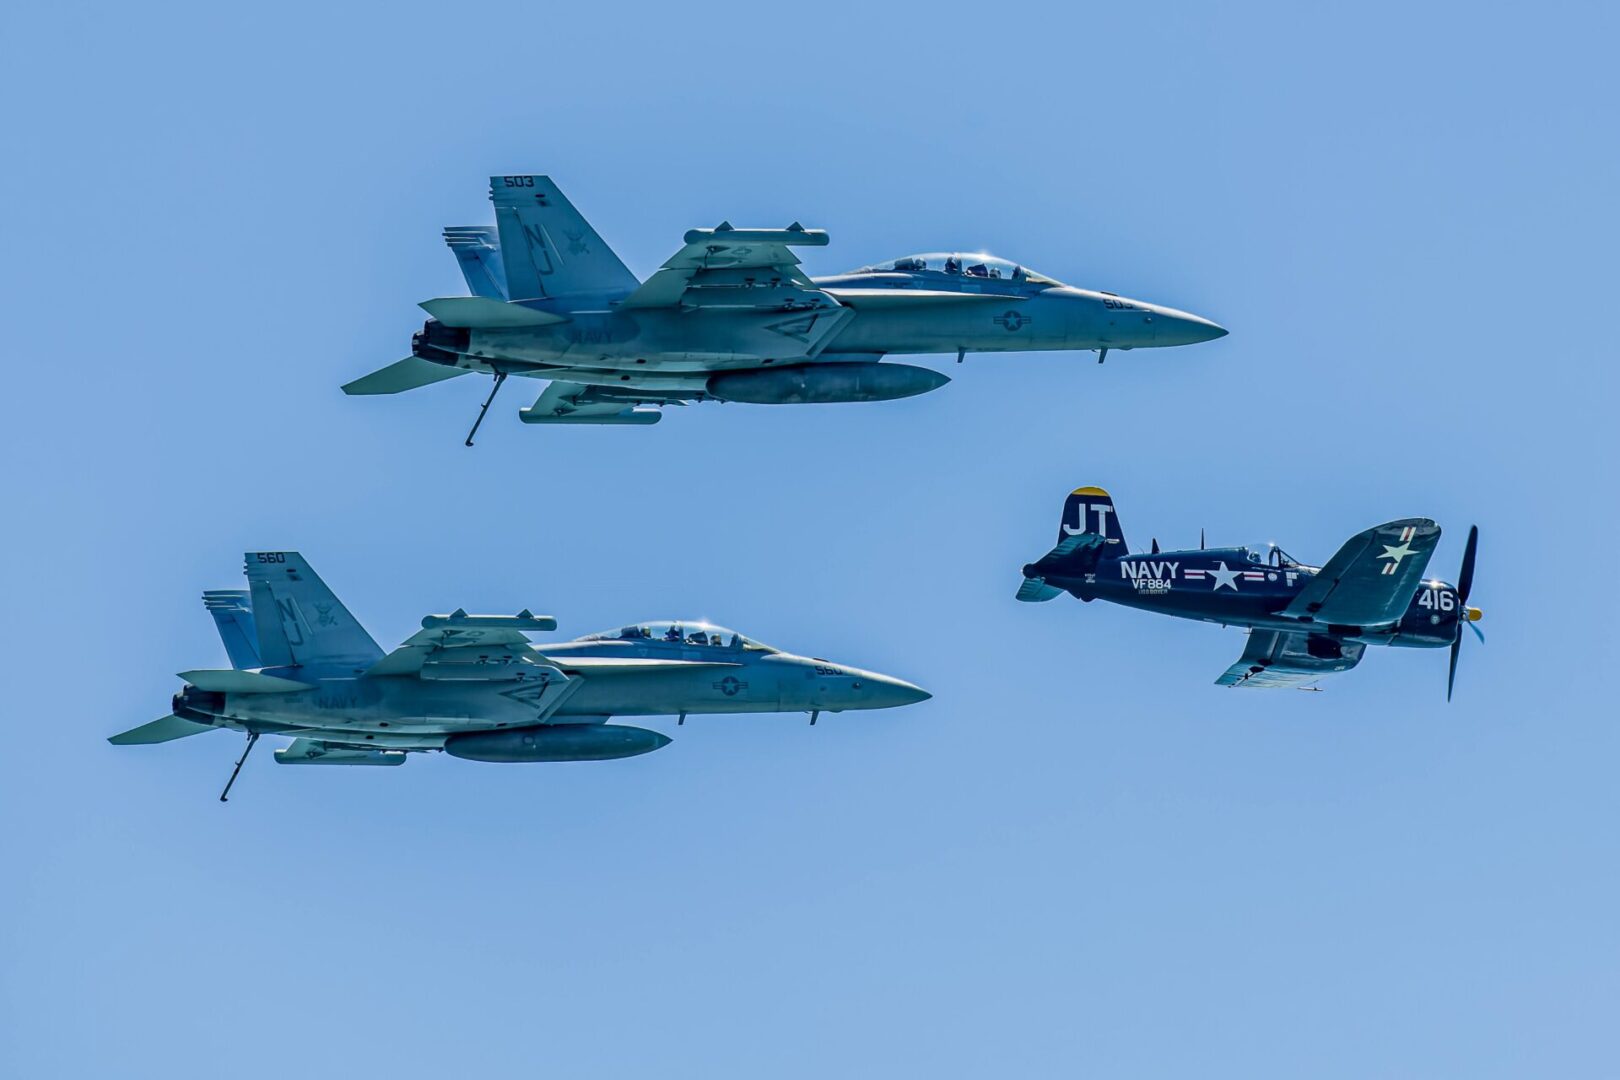 Two jets flying in formation with a fighter jet behind them.